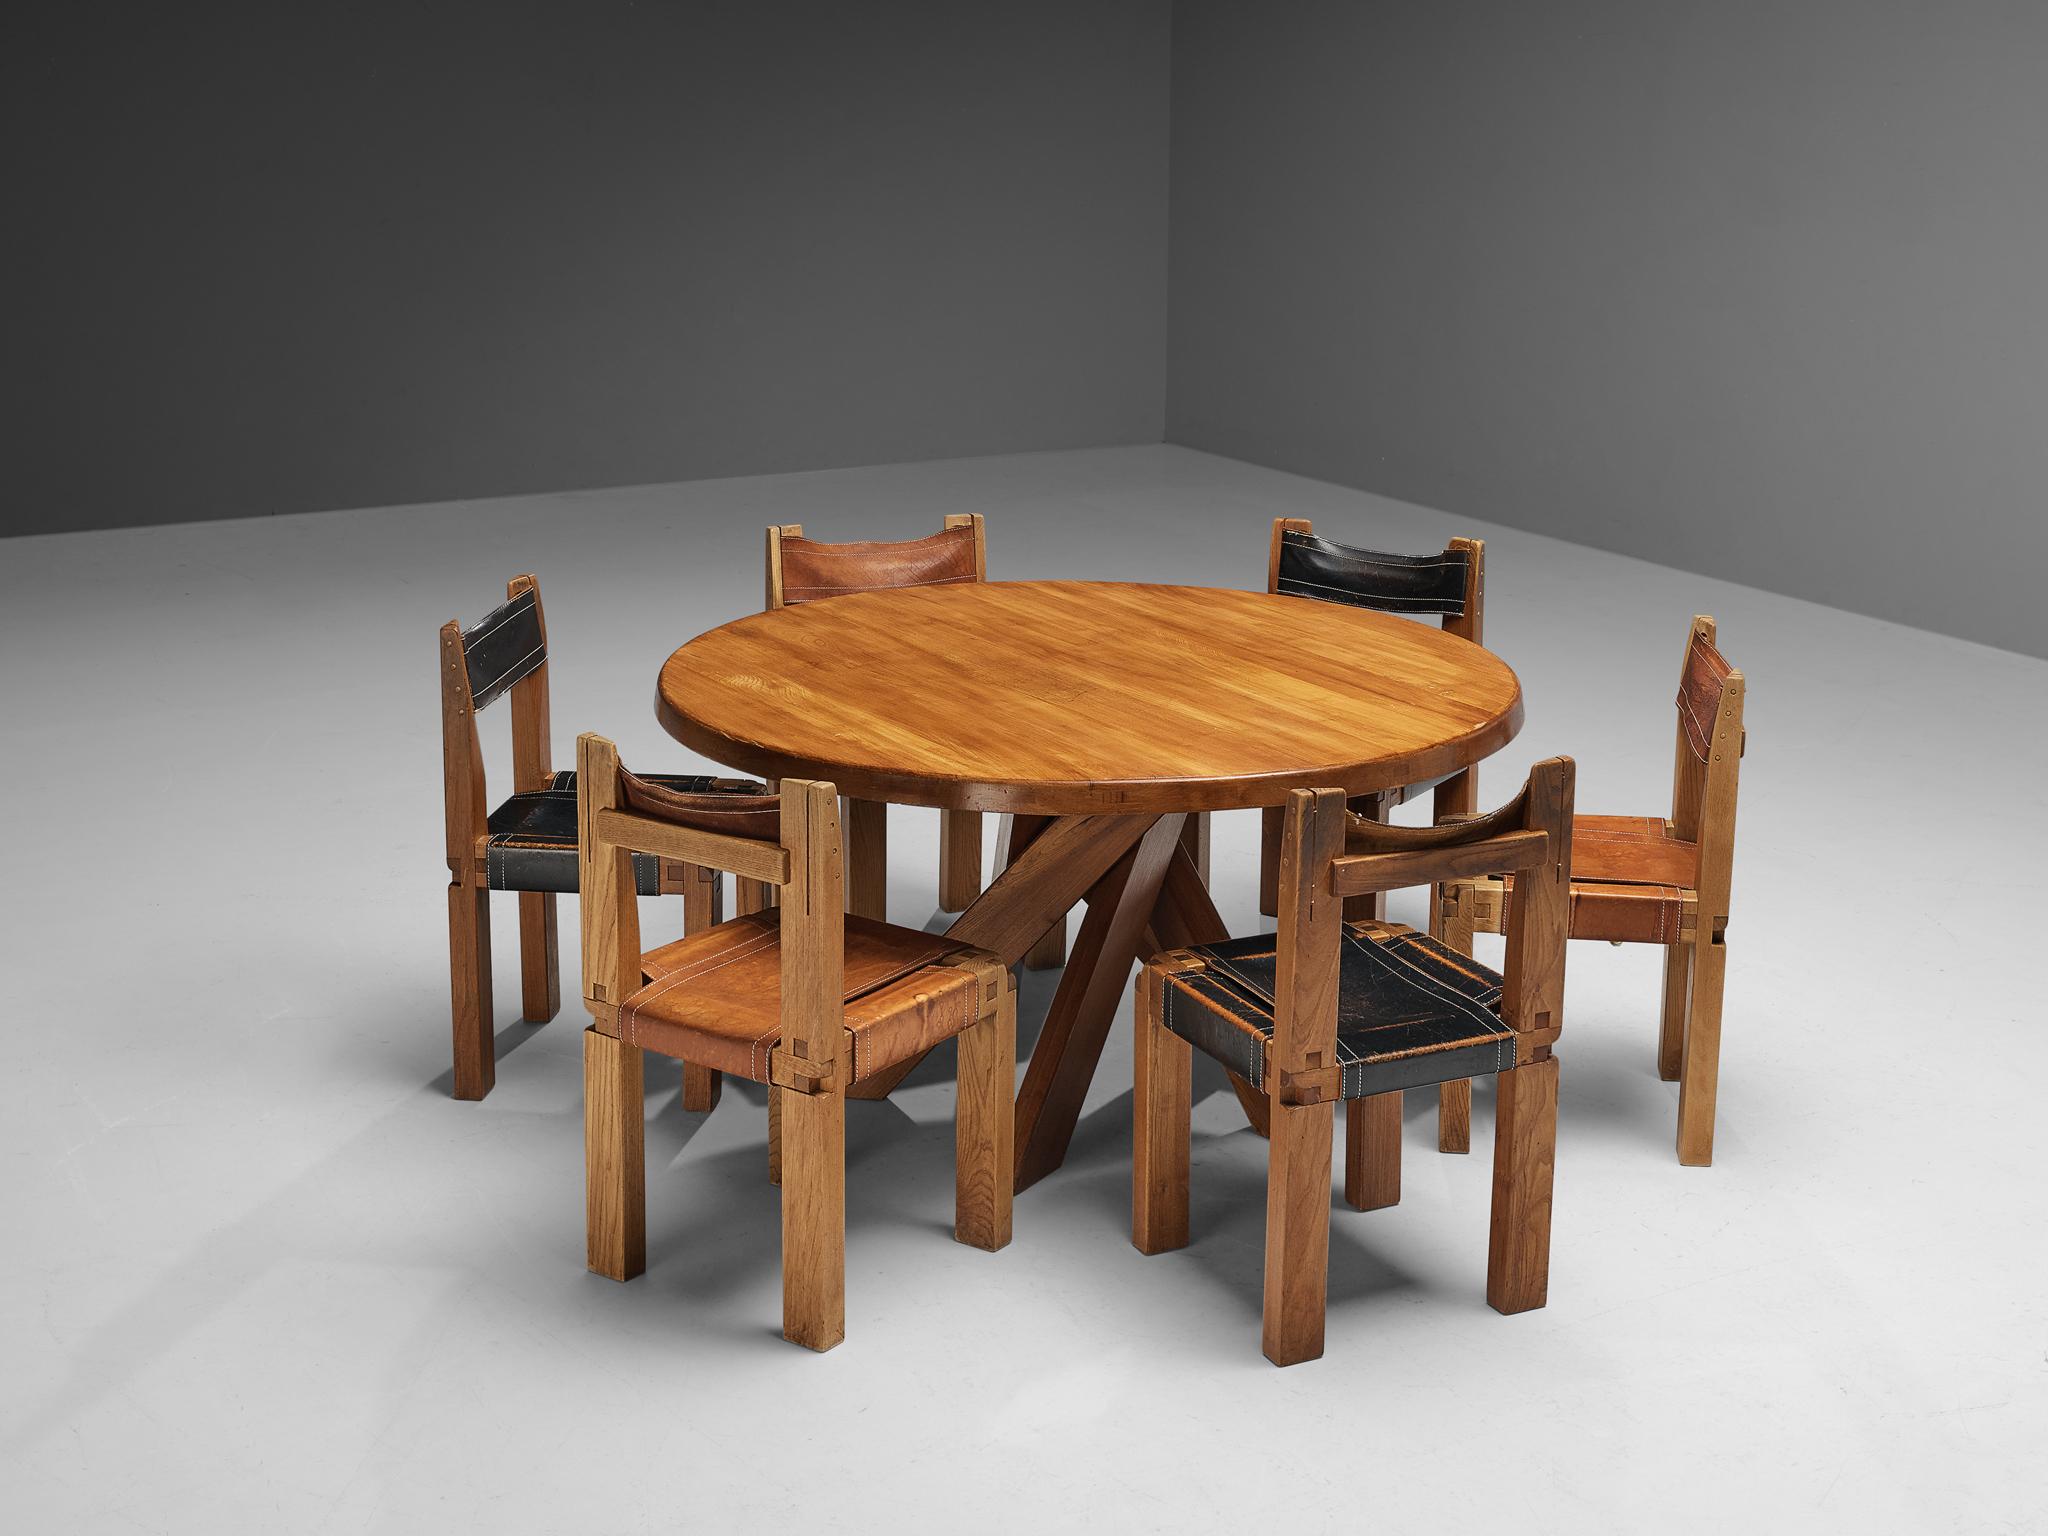 Pierre Chapo, dining table model T21D, elm, France, 1960s

This design is an early edition, created according to the original craft methodology of Pierre Chapo. The shape of the base creates a very dynamic look. The perfectly made solid wood